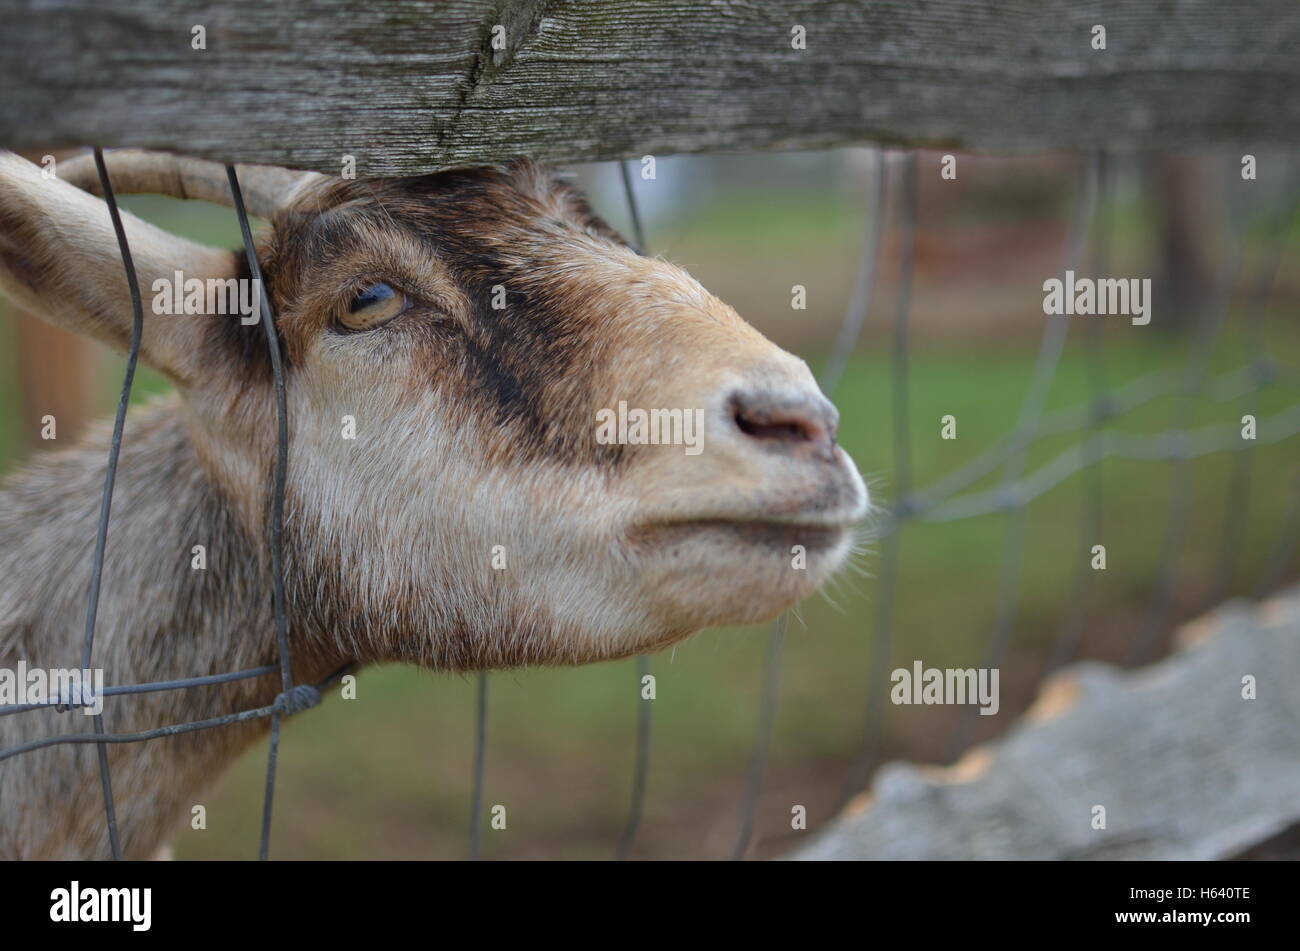 Goat behind a fence Stock Photo